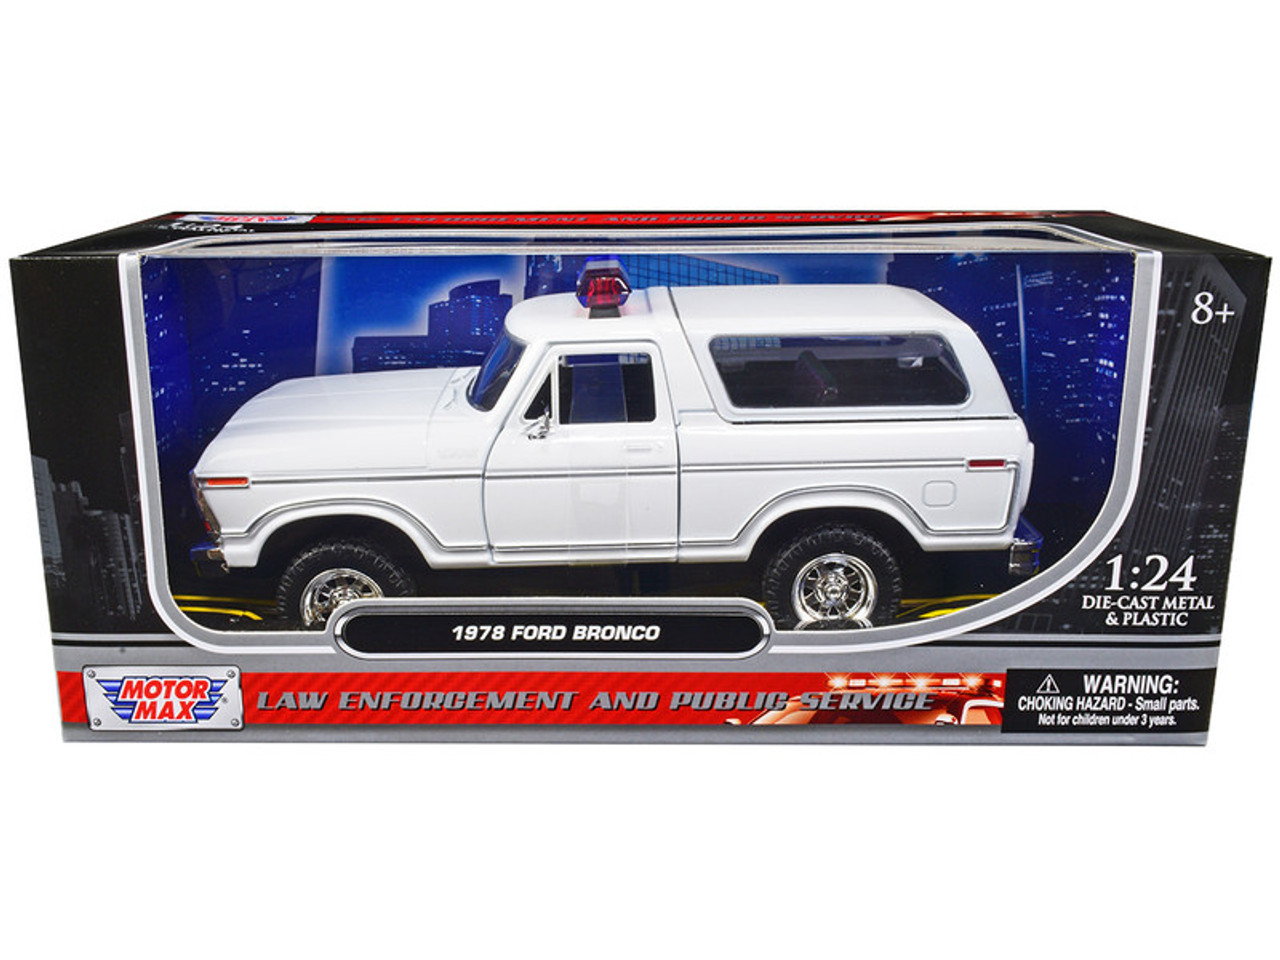 1/24 Motormax 1978 Ford Bronco Police Car Unmarked White "Law Enforcement and Public Service" Series Diecast Car Model